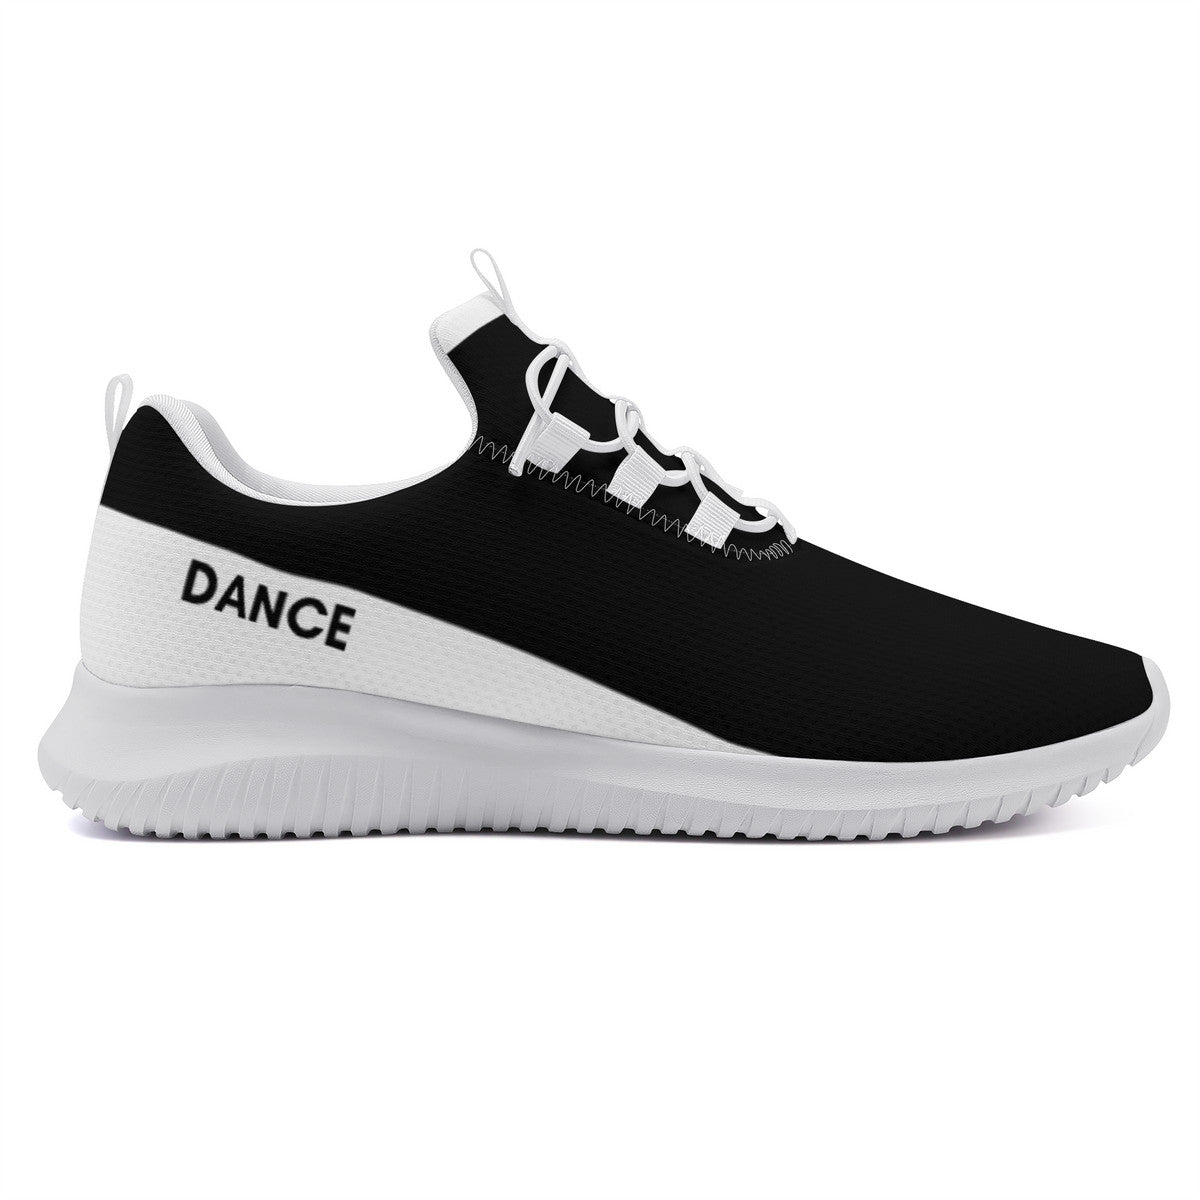 Dance Sneakers - Black and White